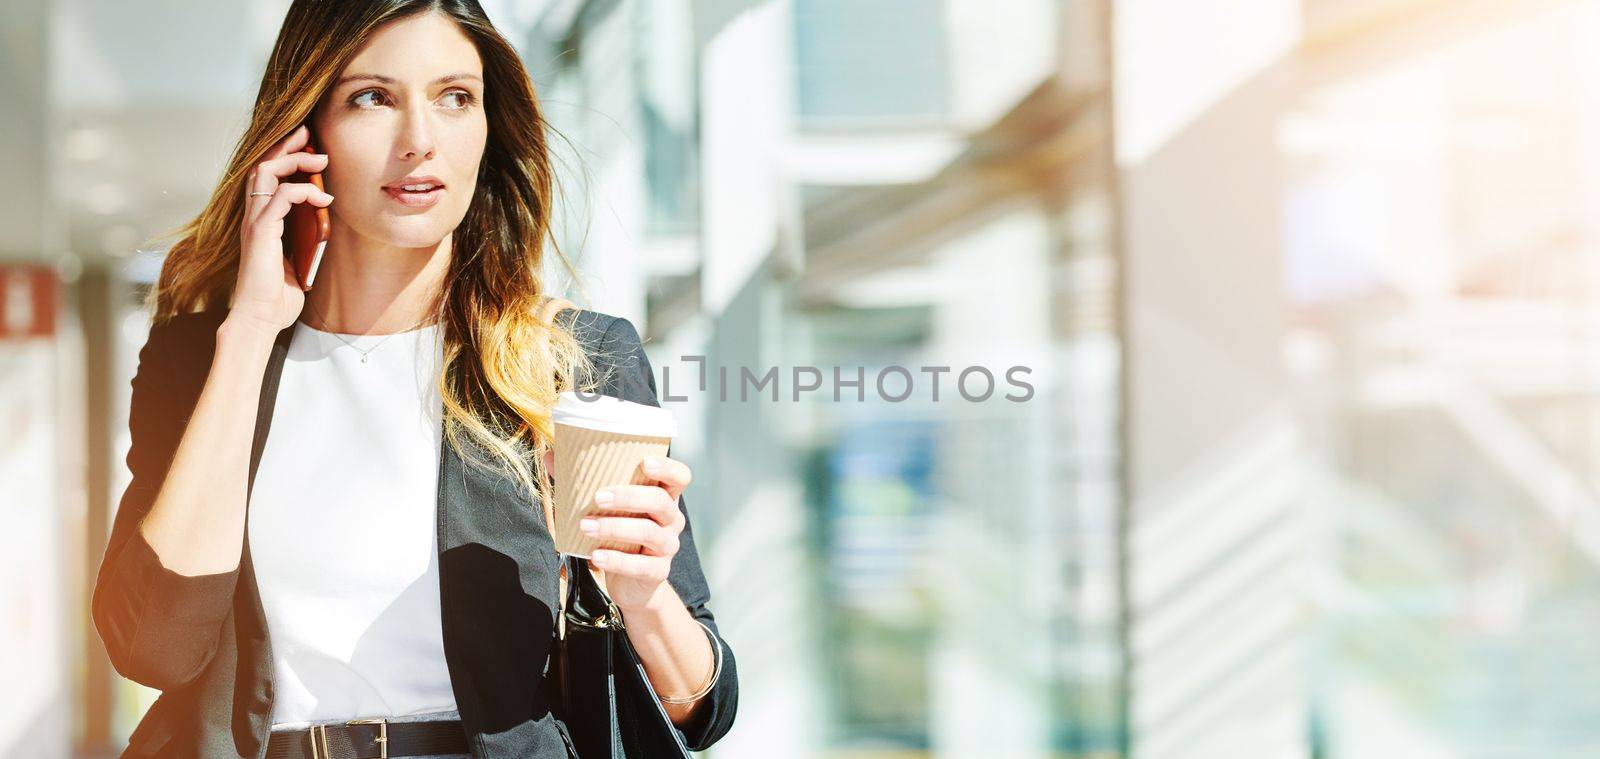 Morning, coffee and woman speaking on a phone call, communication and networking on a mobile. Walking, business and thinking corporate employee talking on a cellphone with a drink in an office.